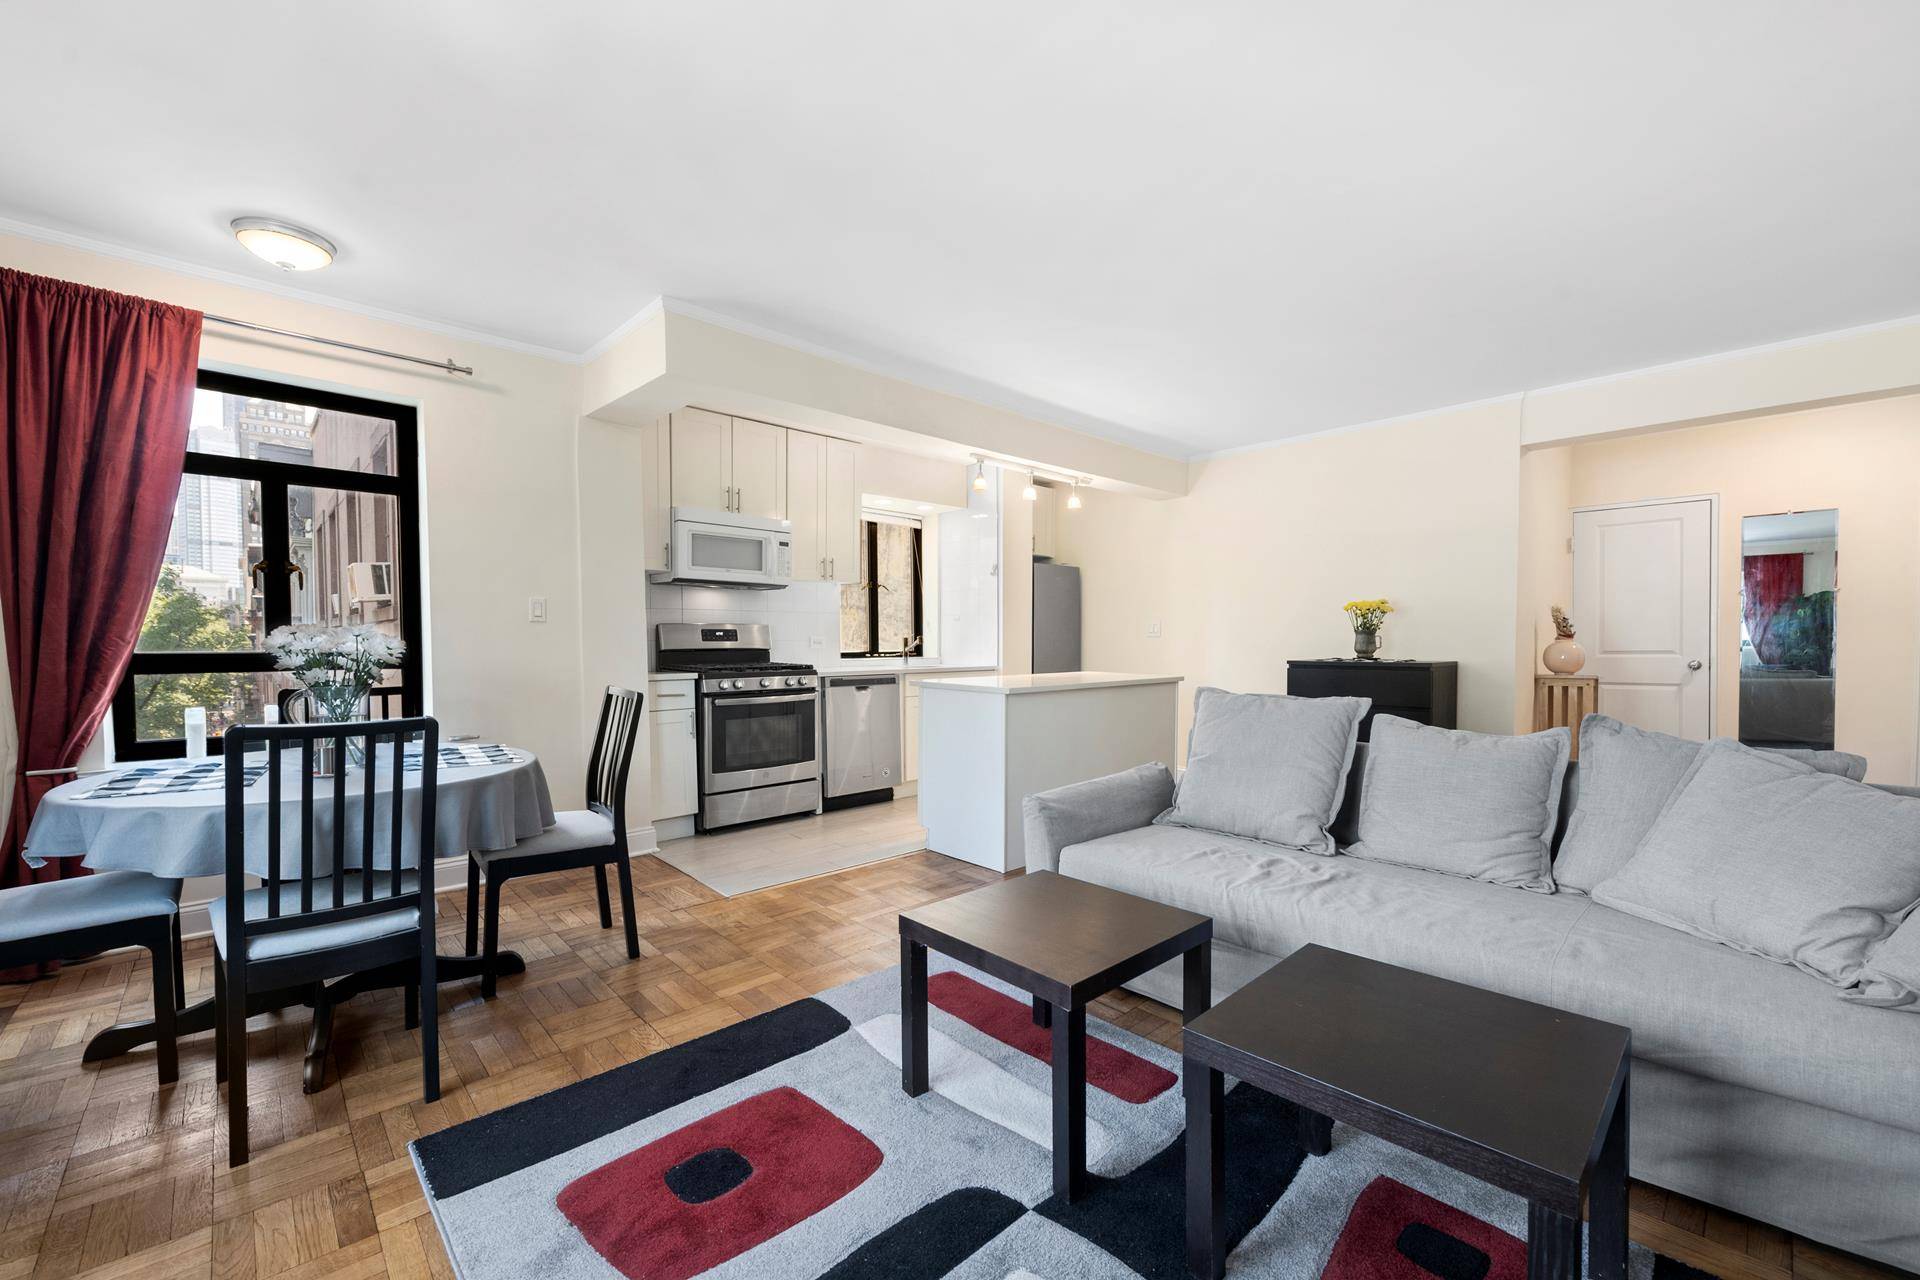 Flooded with Light, this oversized corner one bedroom apartment with multiple views overlooking brownstone Brooklyn's treelined blocks with Views of the city is not to miss.